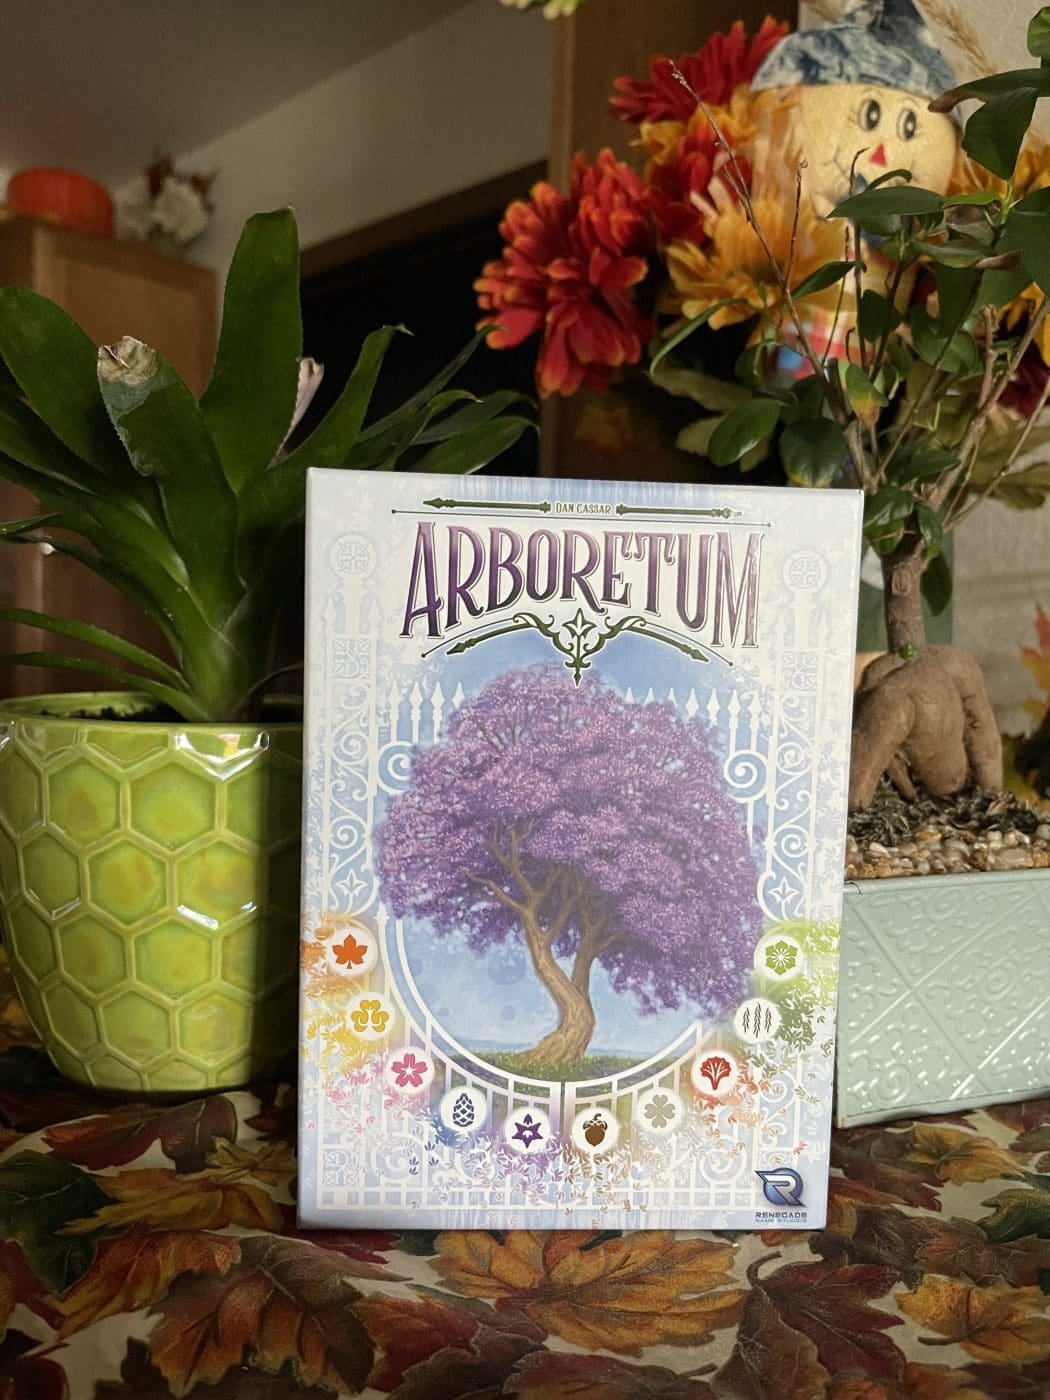 The box for arboretum with plants around it - arboretum: the card game review